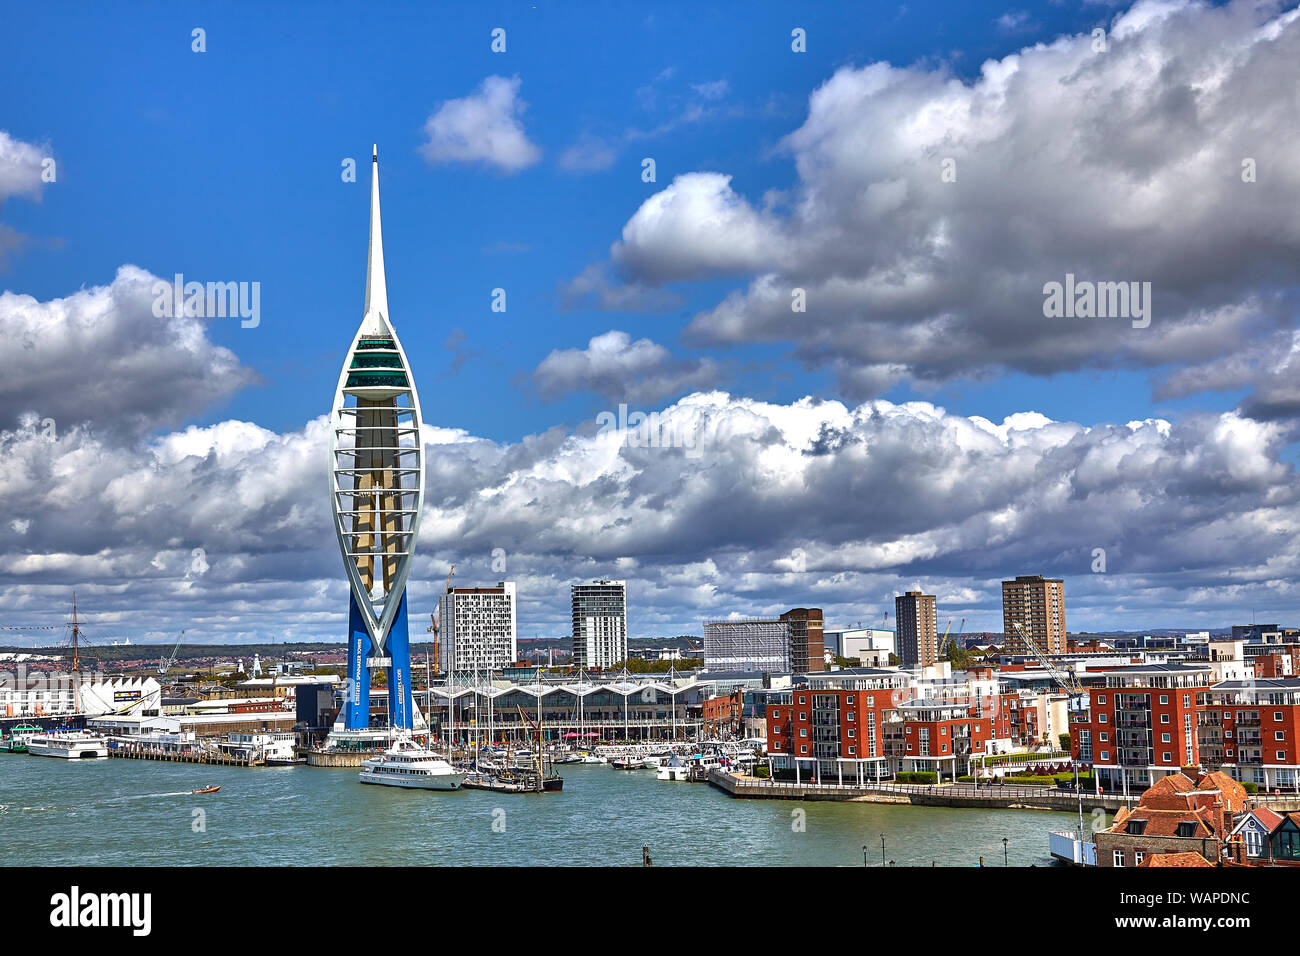 Portsmouth Harbour is a large natural harbour in Hampshire, England. It is best known as the home of the Royal Navy, HMNB Portsmouth Stock Photo